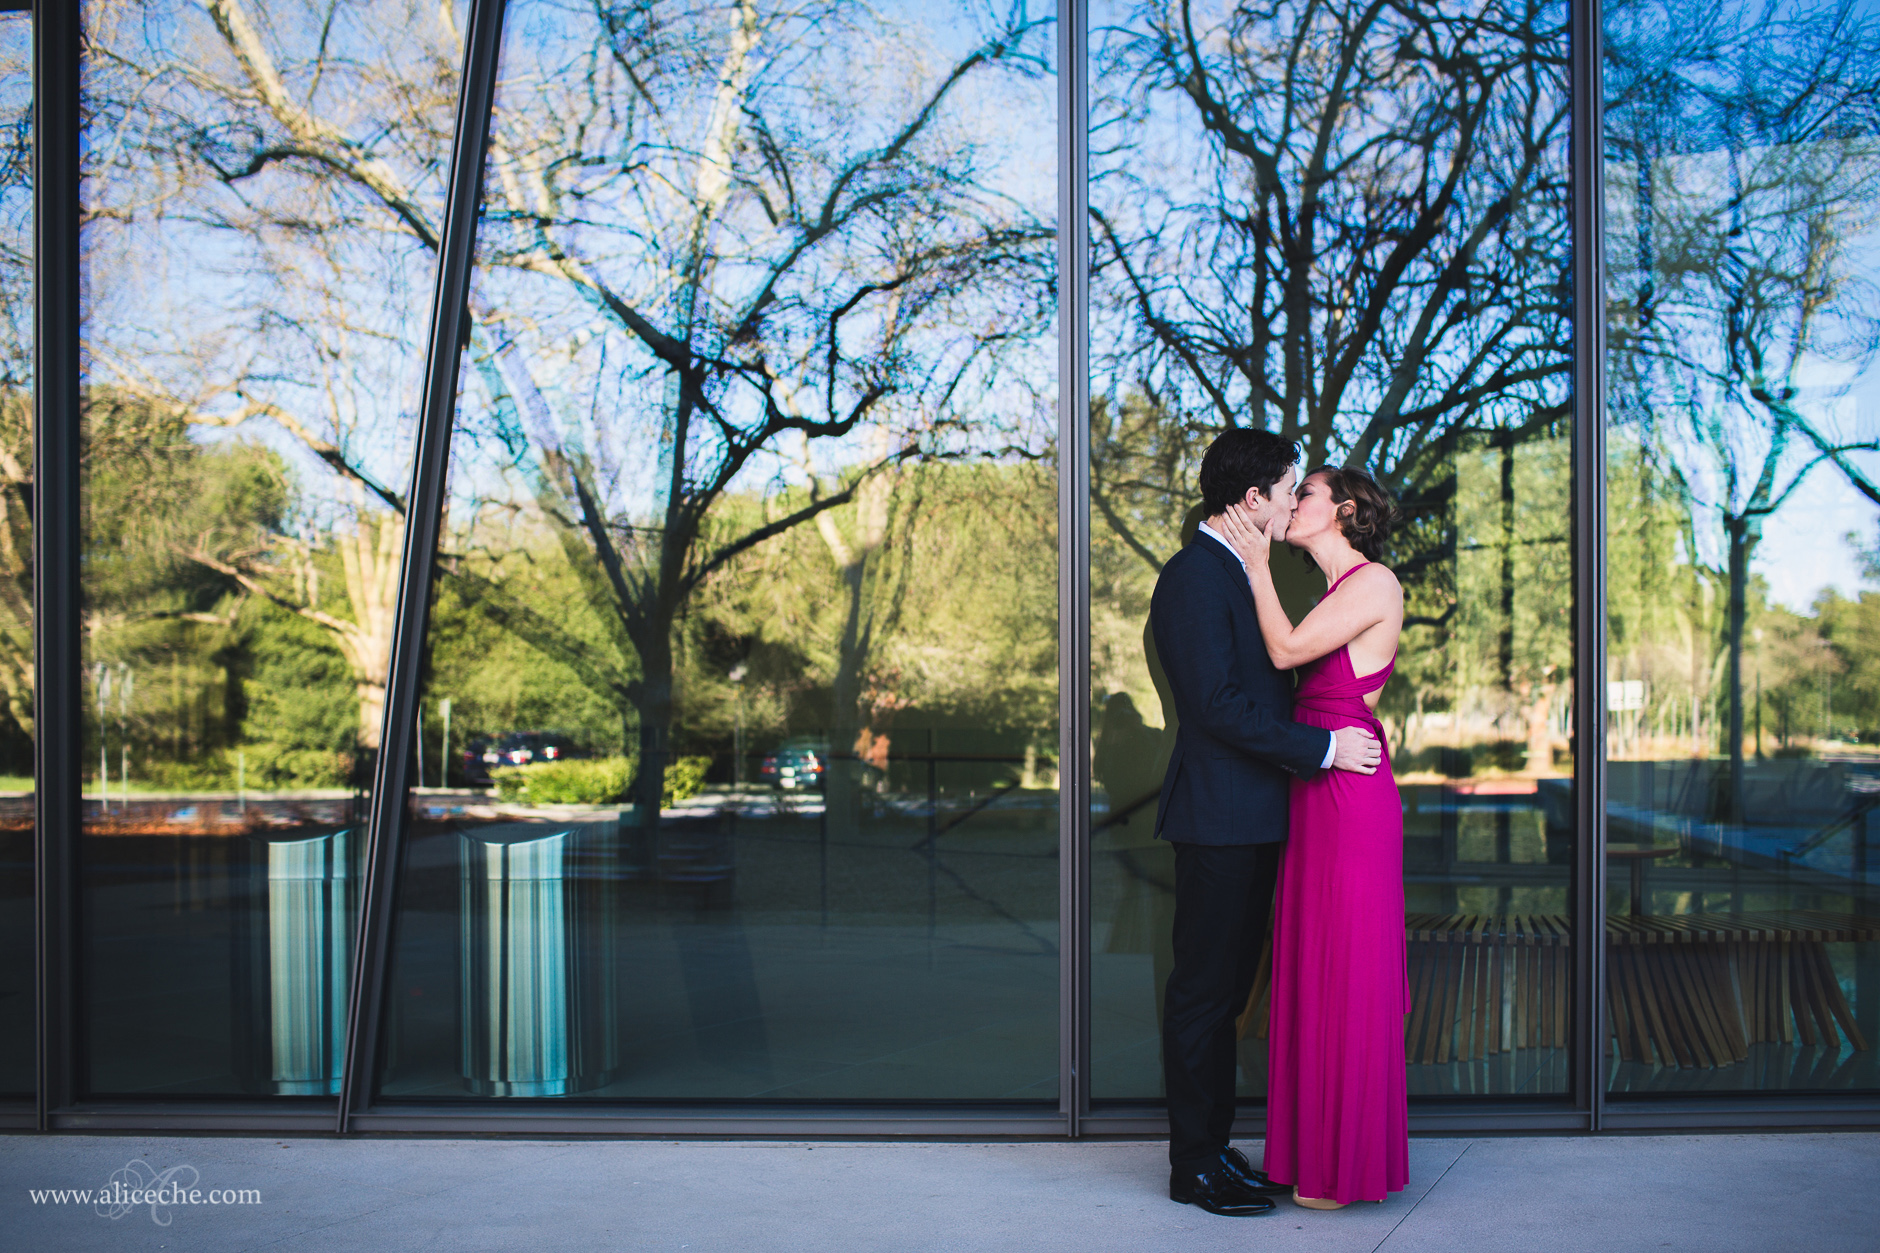 alice-che-photography-palo-alto-anniversary-session-couple-kissing-glass-reflections